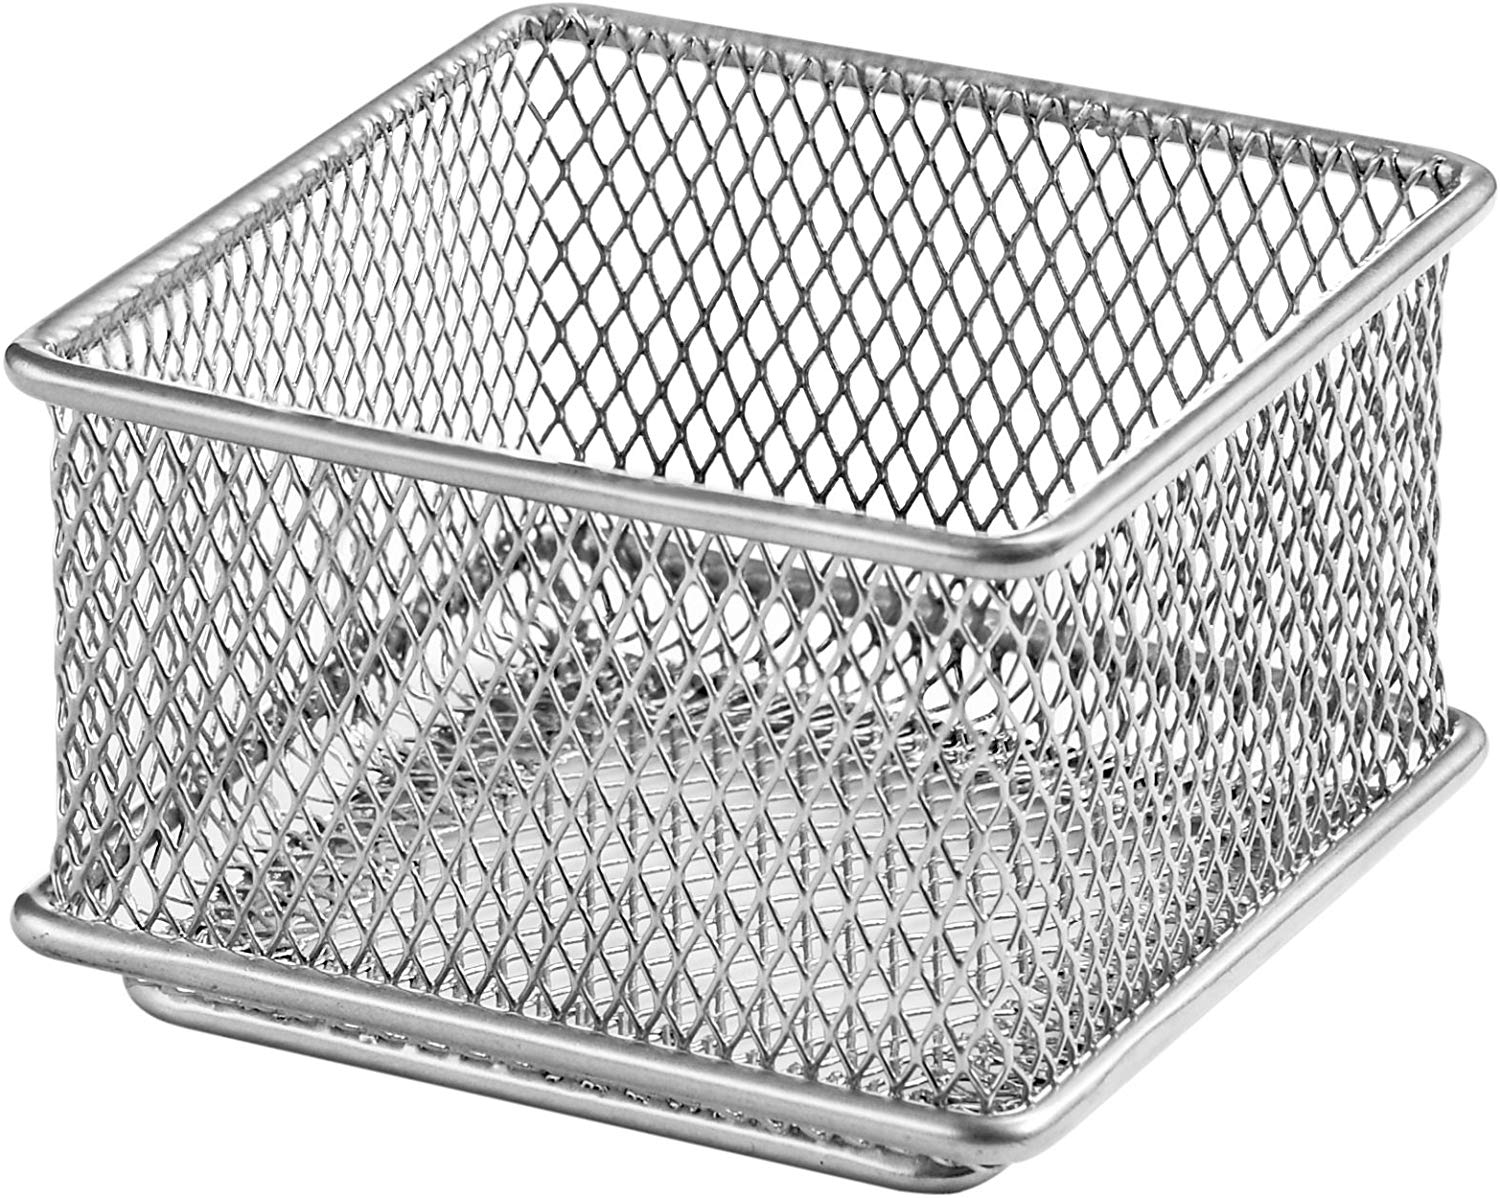 Bronze Flexible Storage Basket with Open Front Design Metal Wire Basket with Handles mDesign Set of 4 All-Purpose Basket 